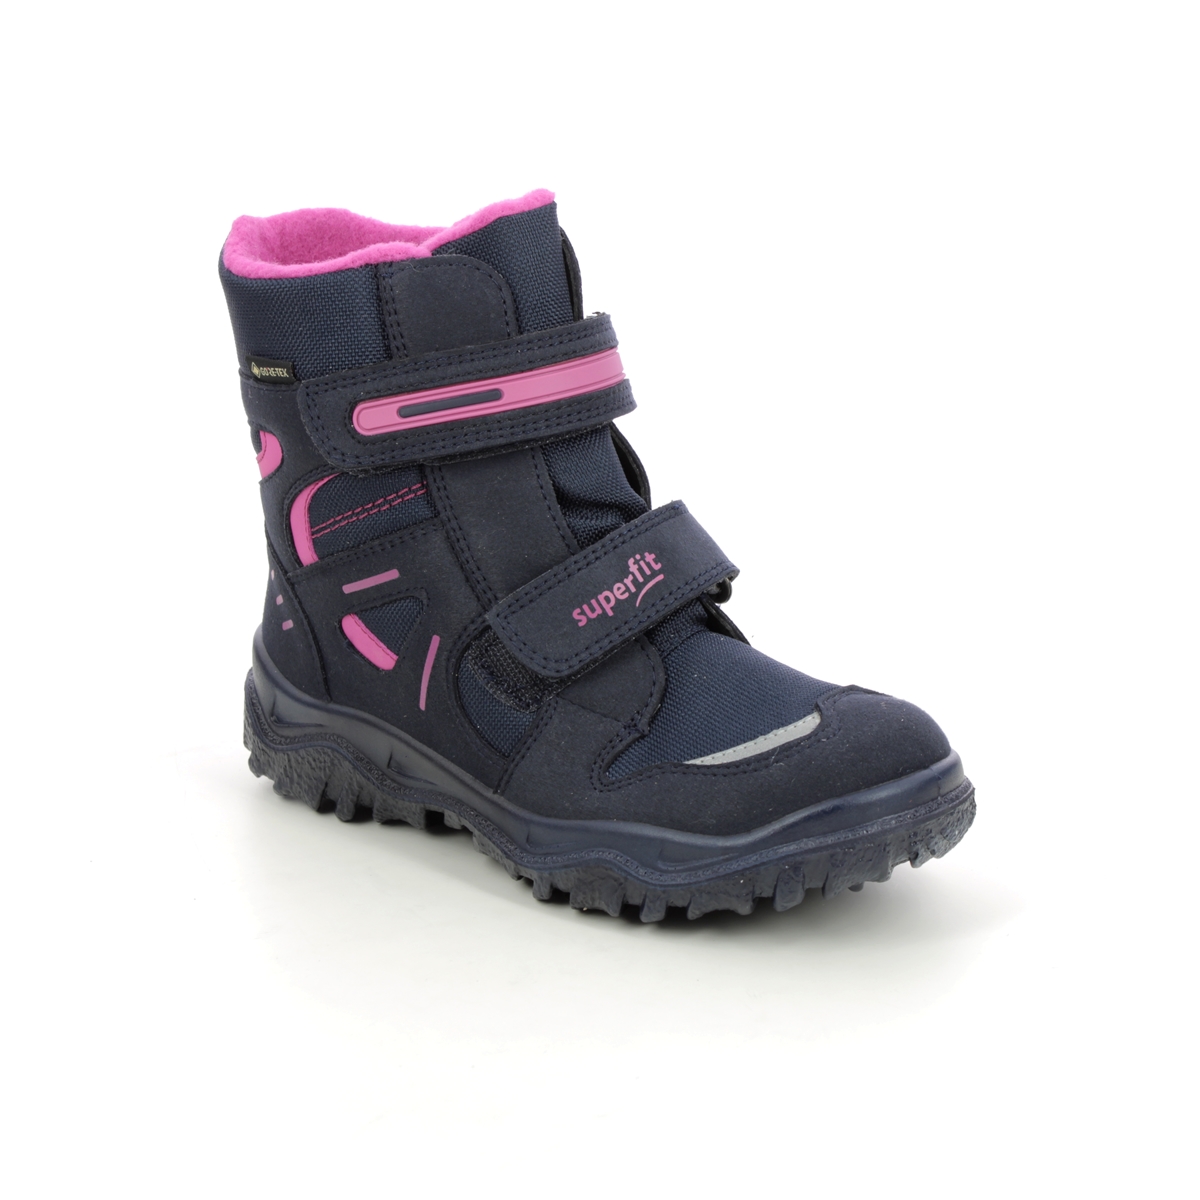 Superfit Husky Jnr Gore Navy Pink Kids Girls Boots 1809080-8020 In Size 33 In Plain Navy Pink For kids